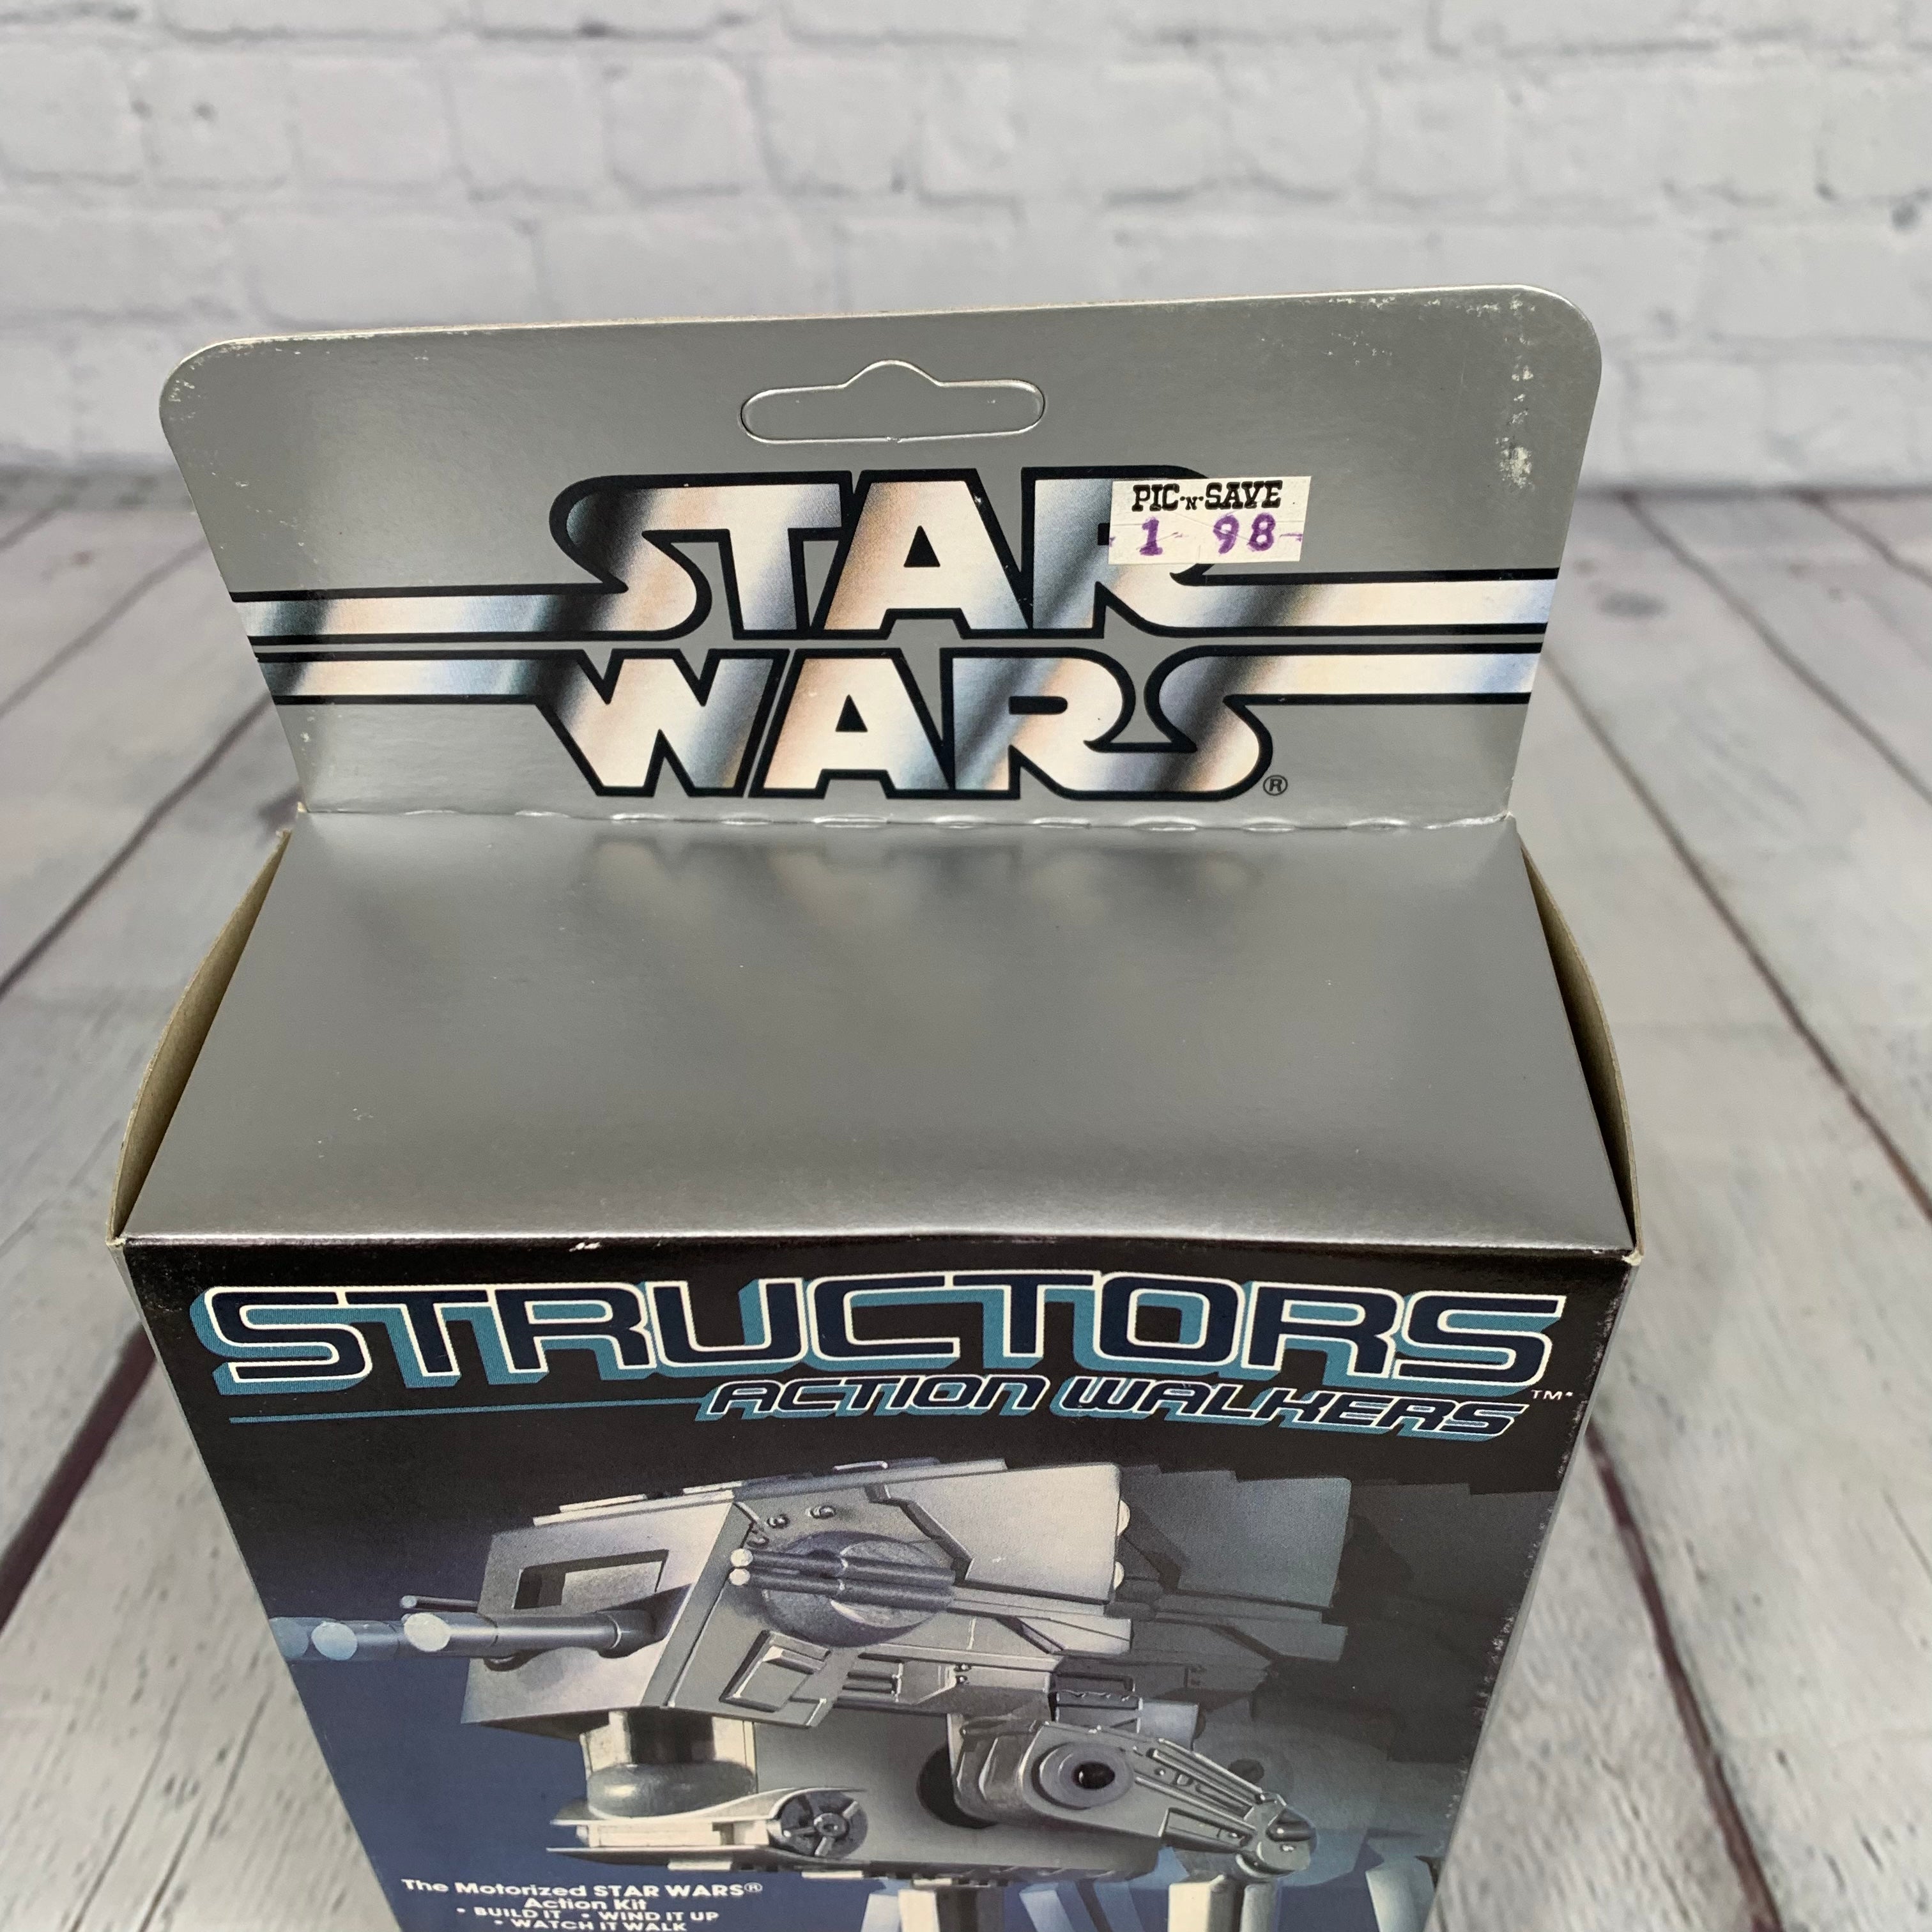 AT-ST, Structors Action Walkers, Star Wars, unopened, 1984, MPC 